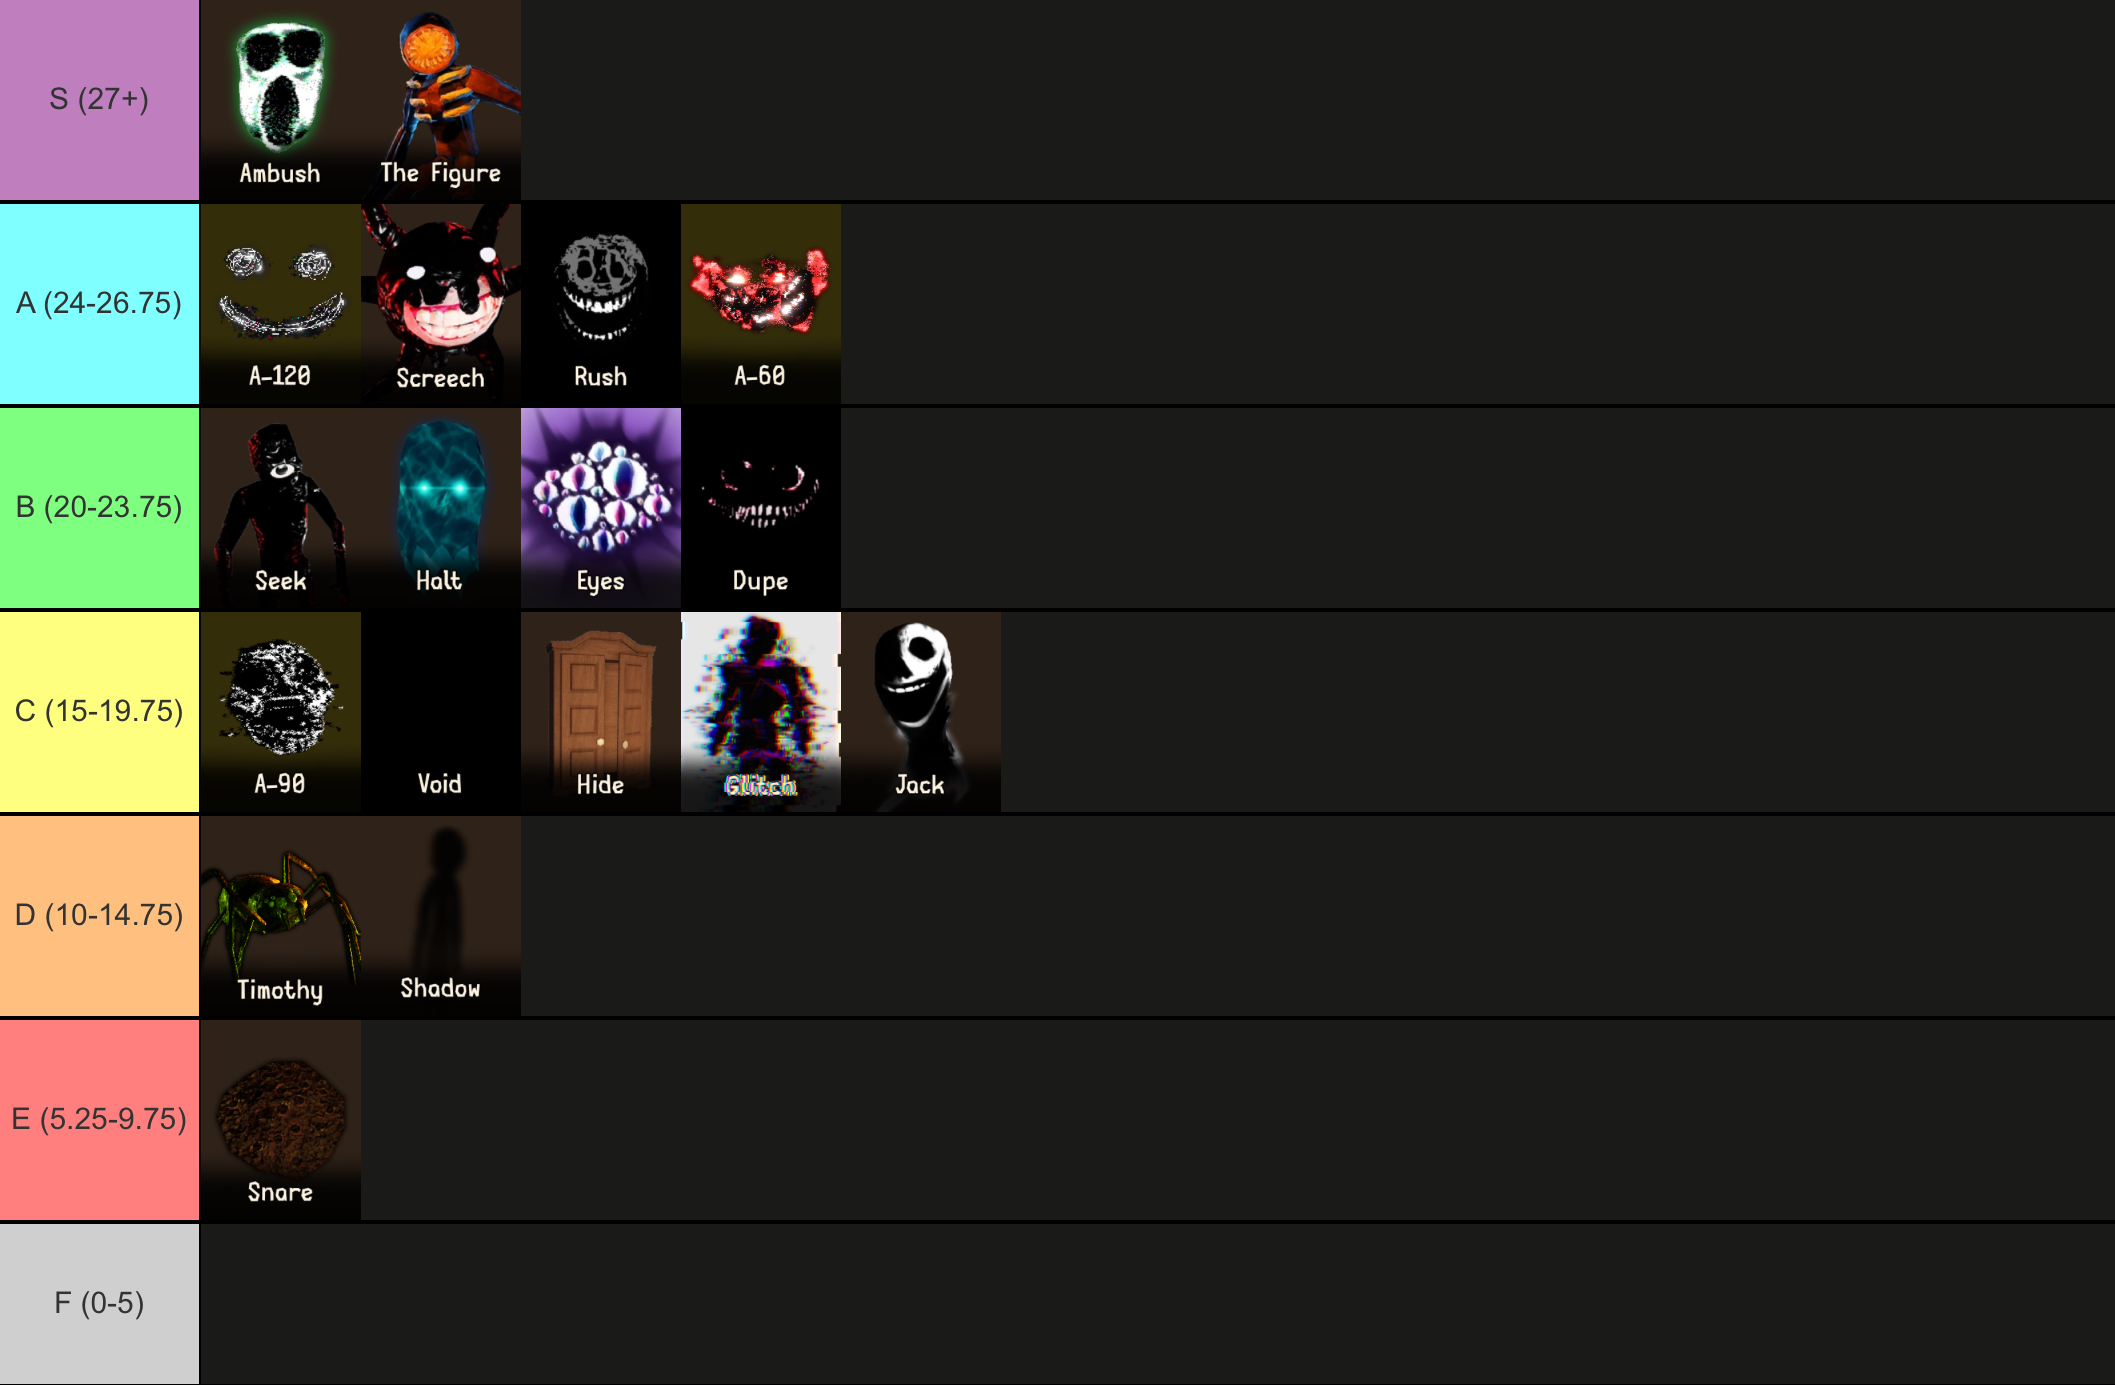 Doors entity scariness tierlist (now with april fools entities